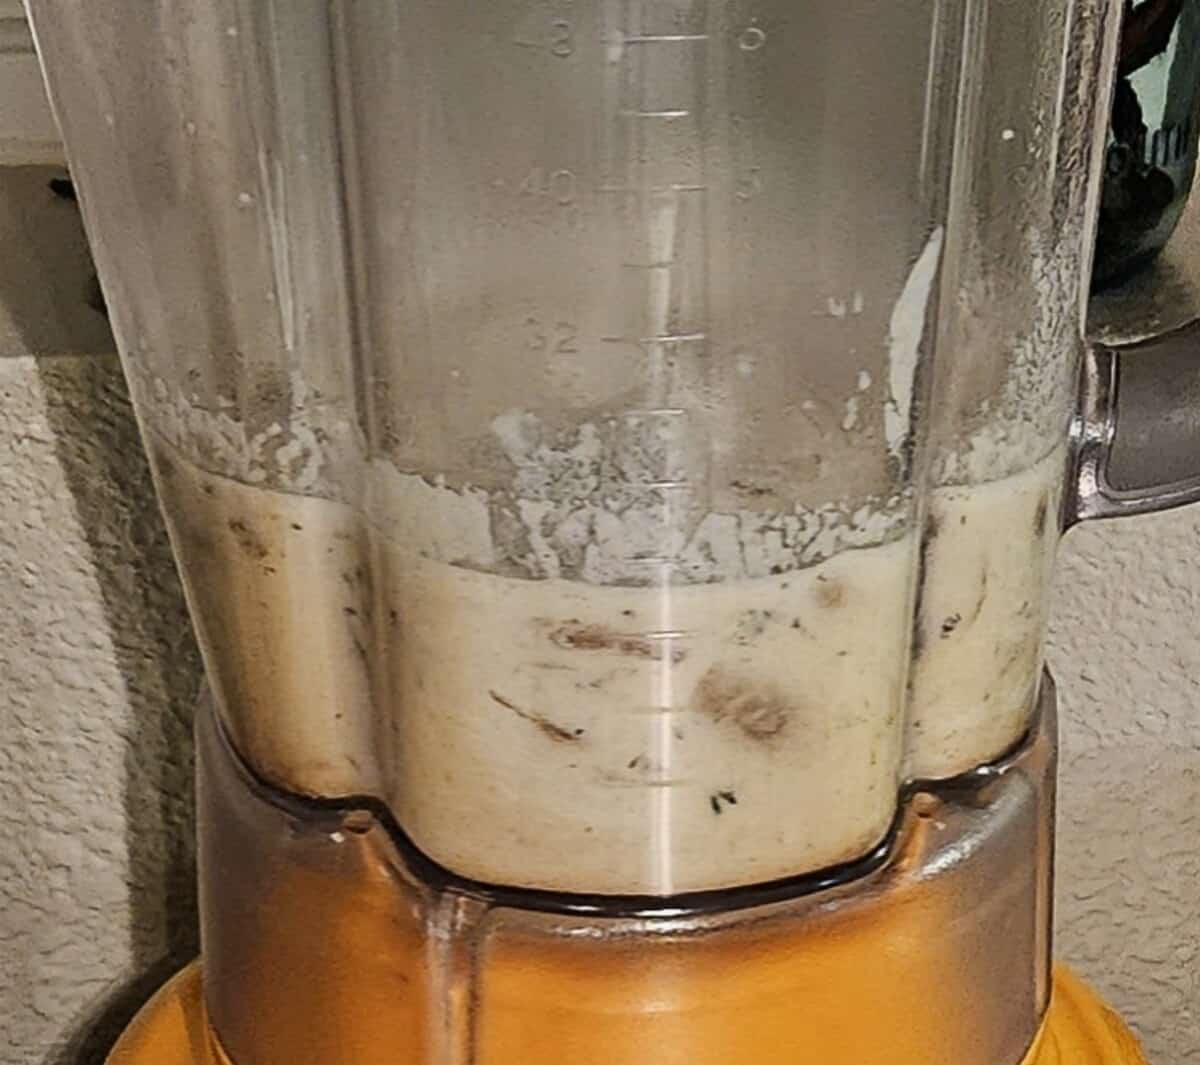 creamy mushroom asiago soup in a blender cup before being turned on to puree.